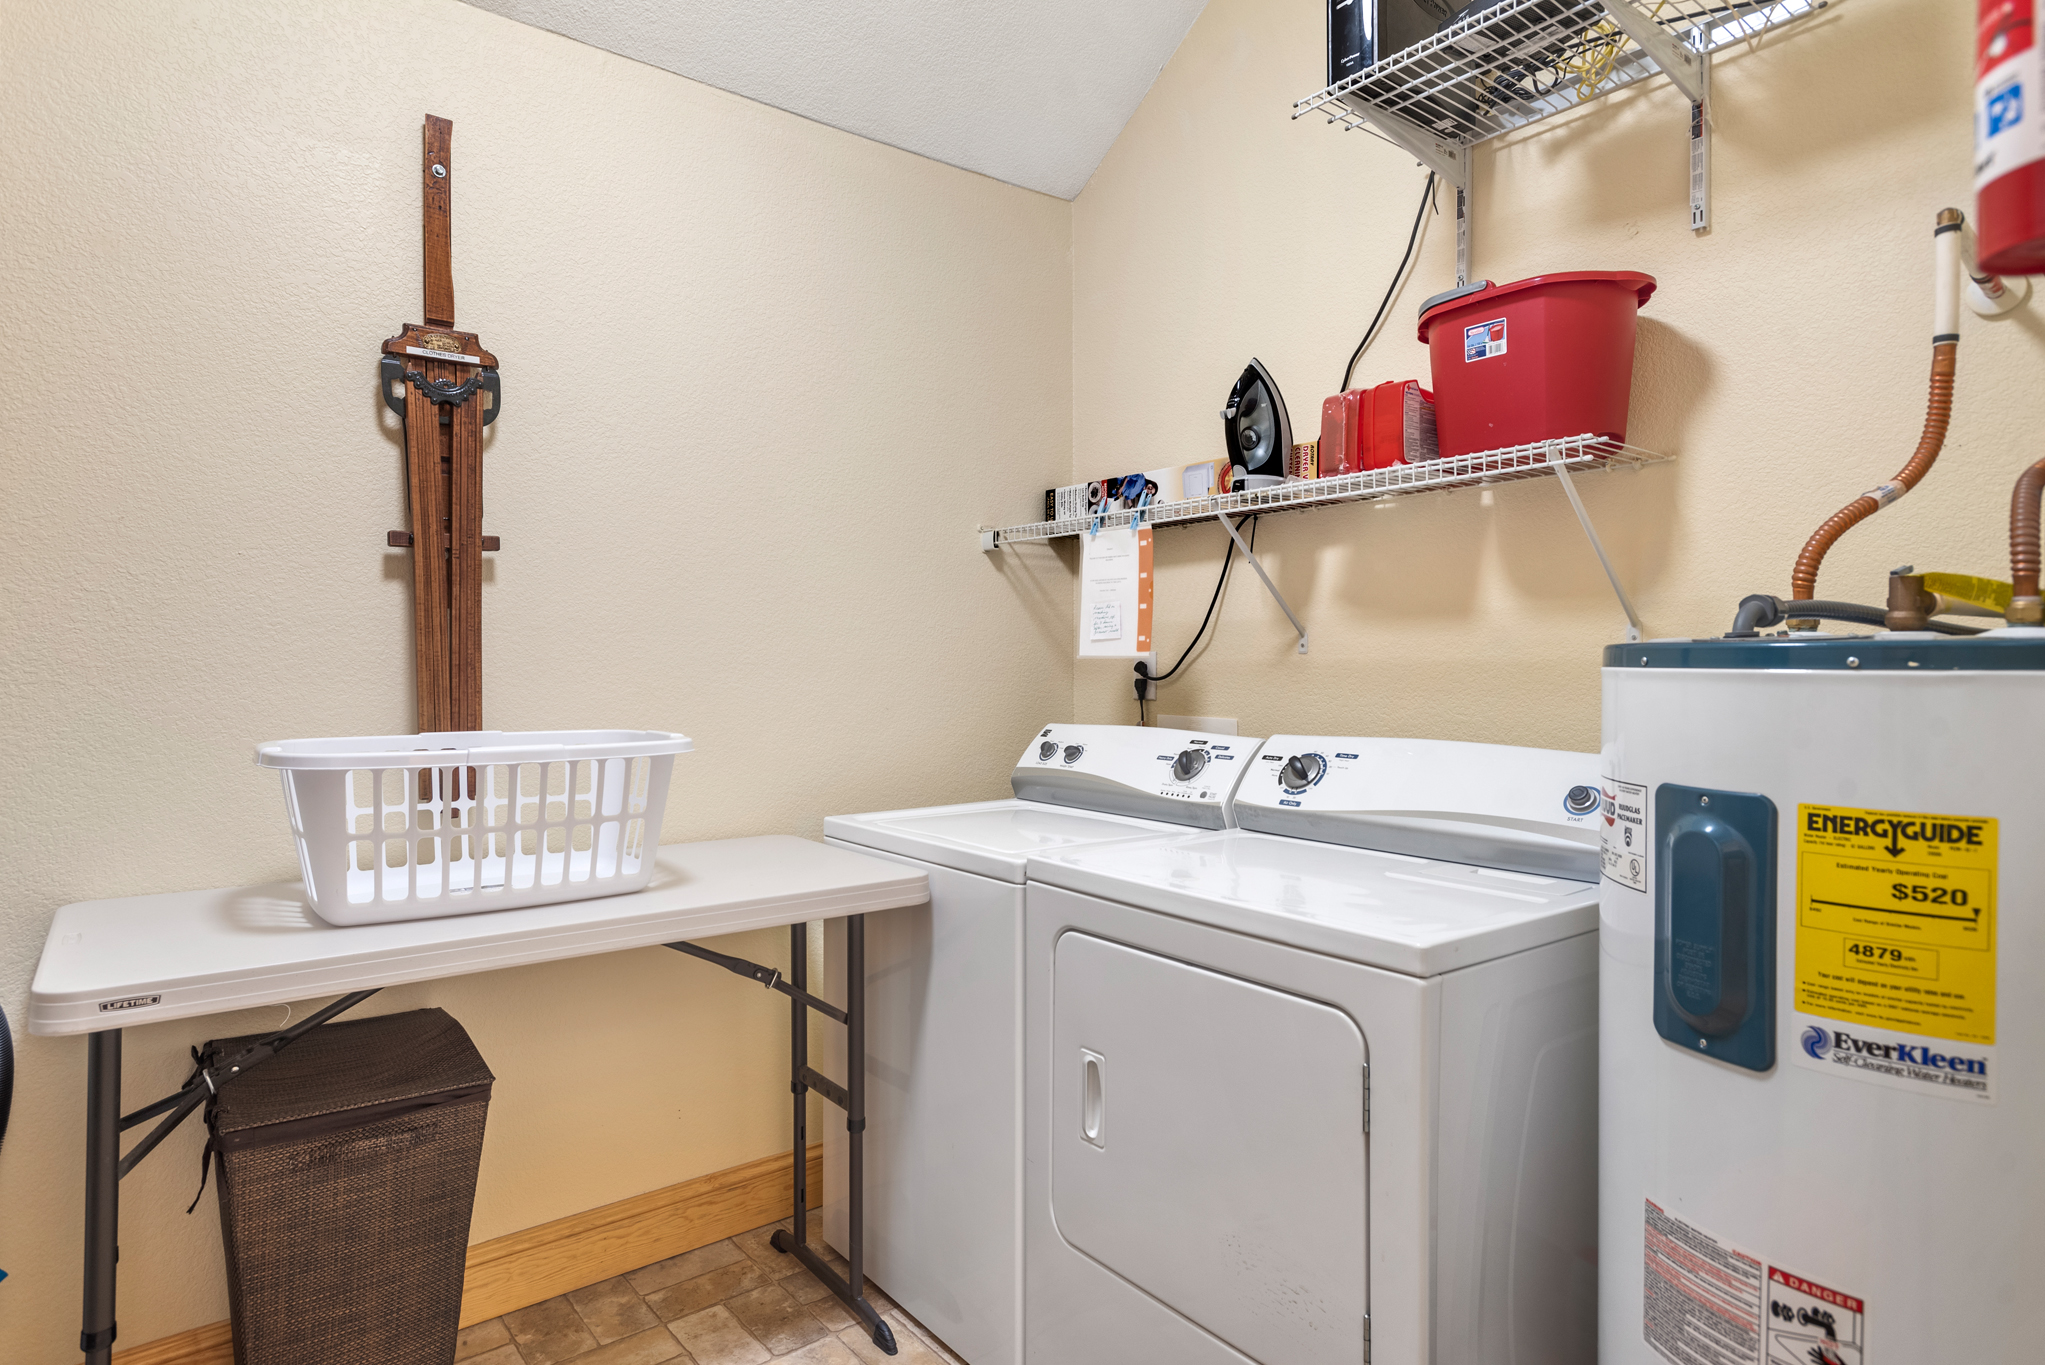 SL305: Look Out - The Landings at Sugar Creek | Laundry Room